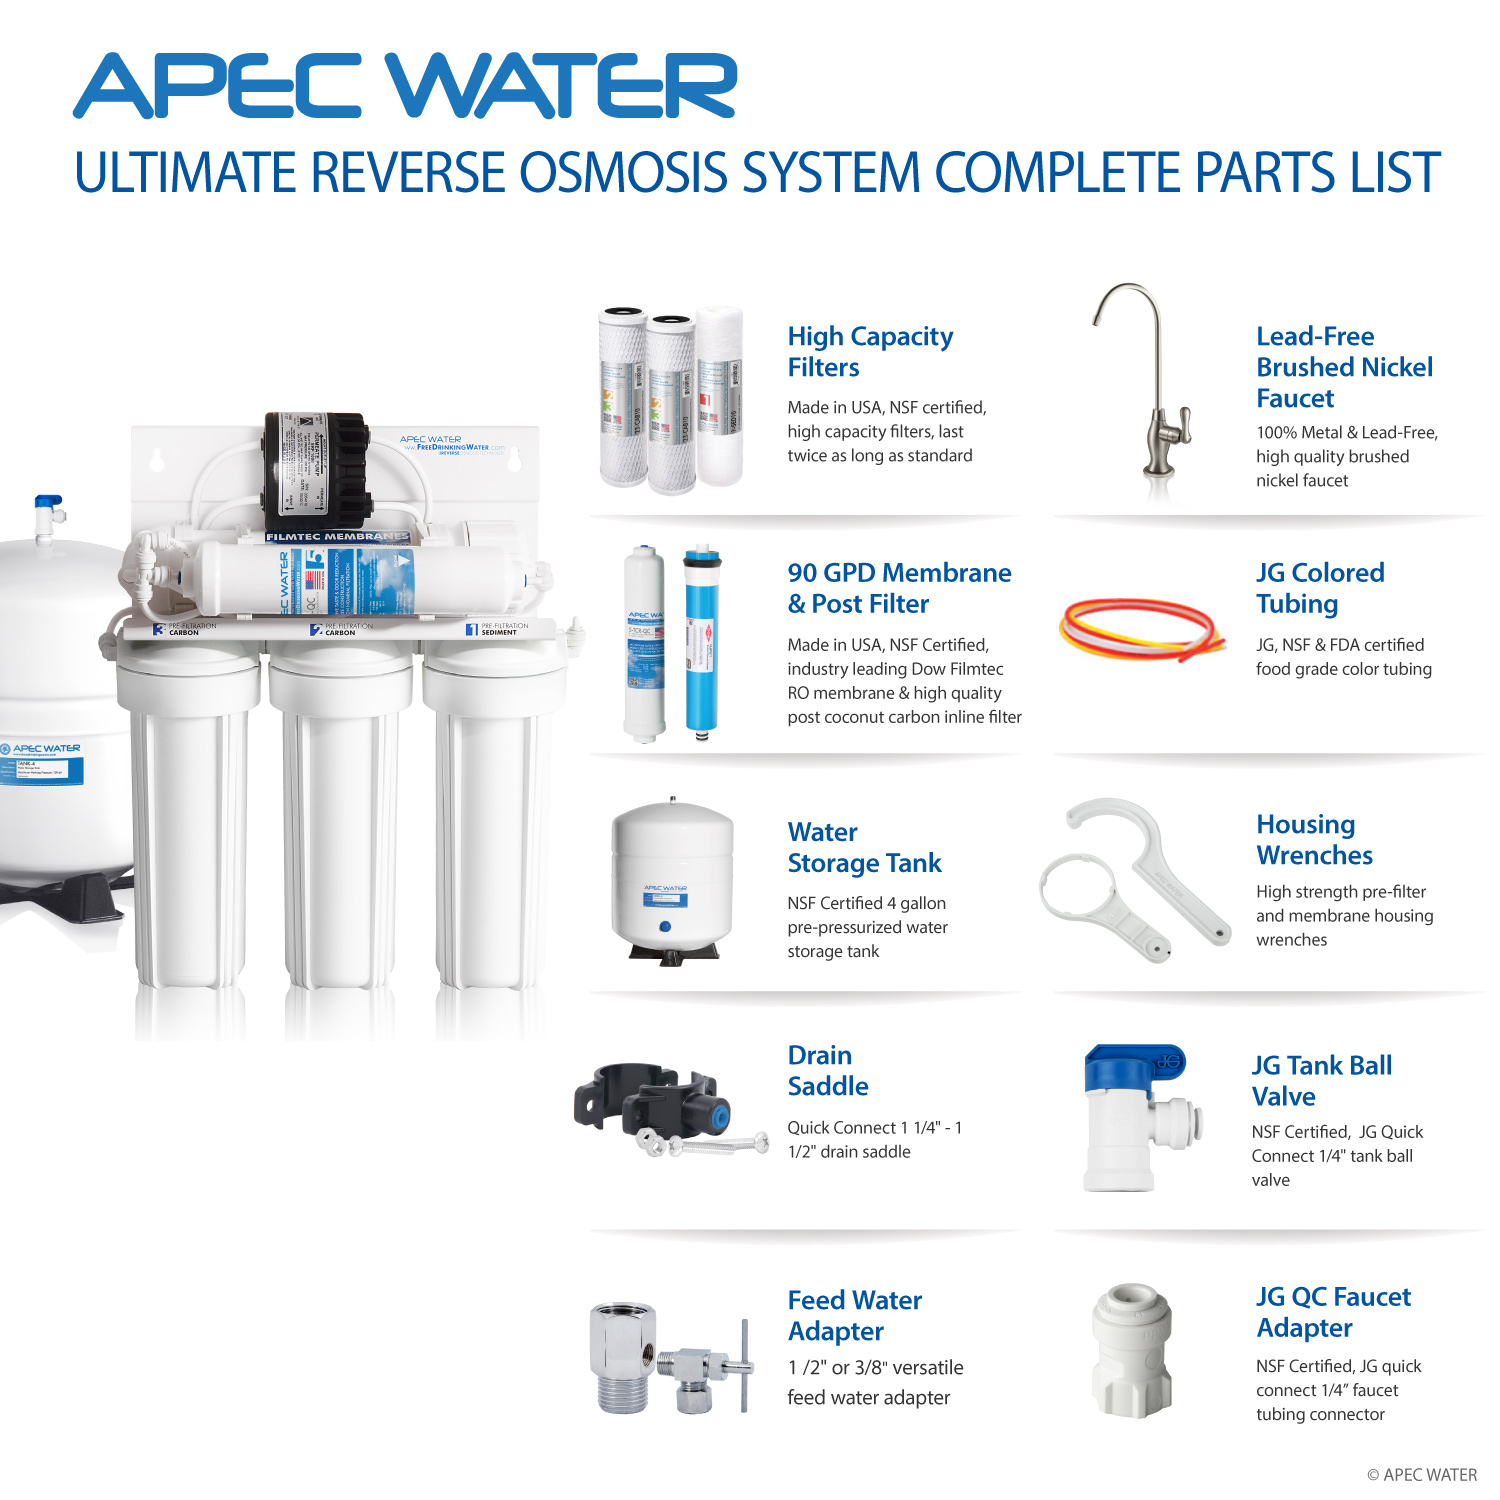 APEC Top Tier Supreme High Efficiency Permeate Pumped Ultra Safe Reverse Osmosis Drinking Water Filter System For Low Pressure Homes (ULTIMATE RO-PERM) - image 3 of 10